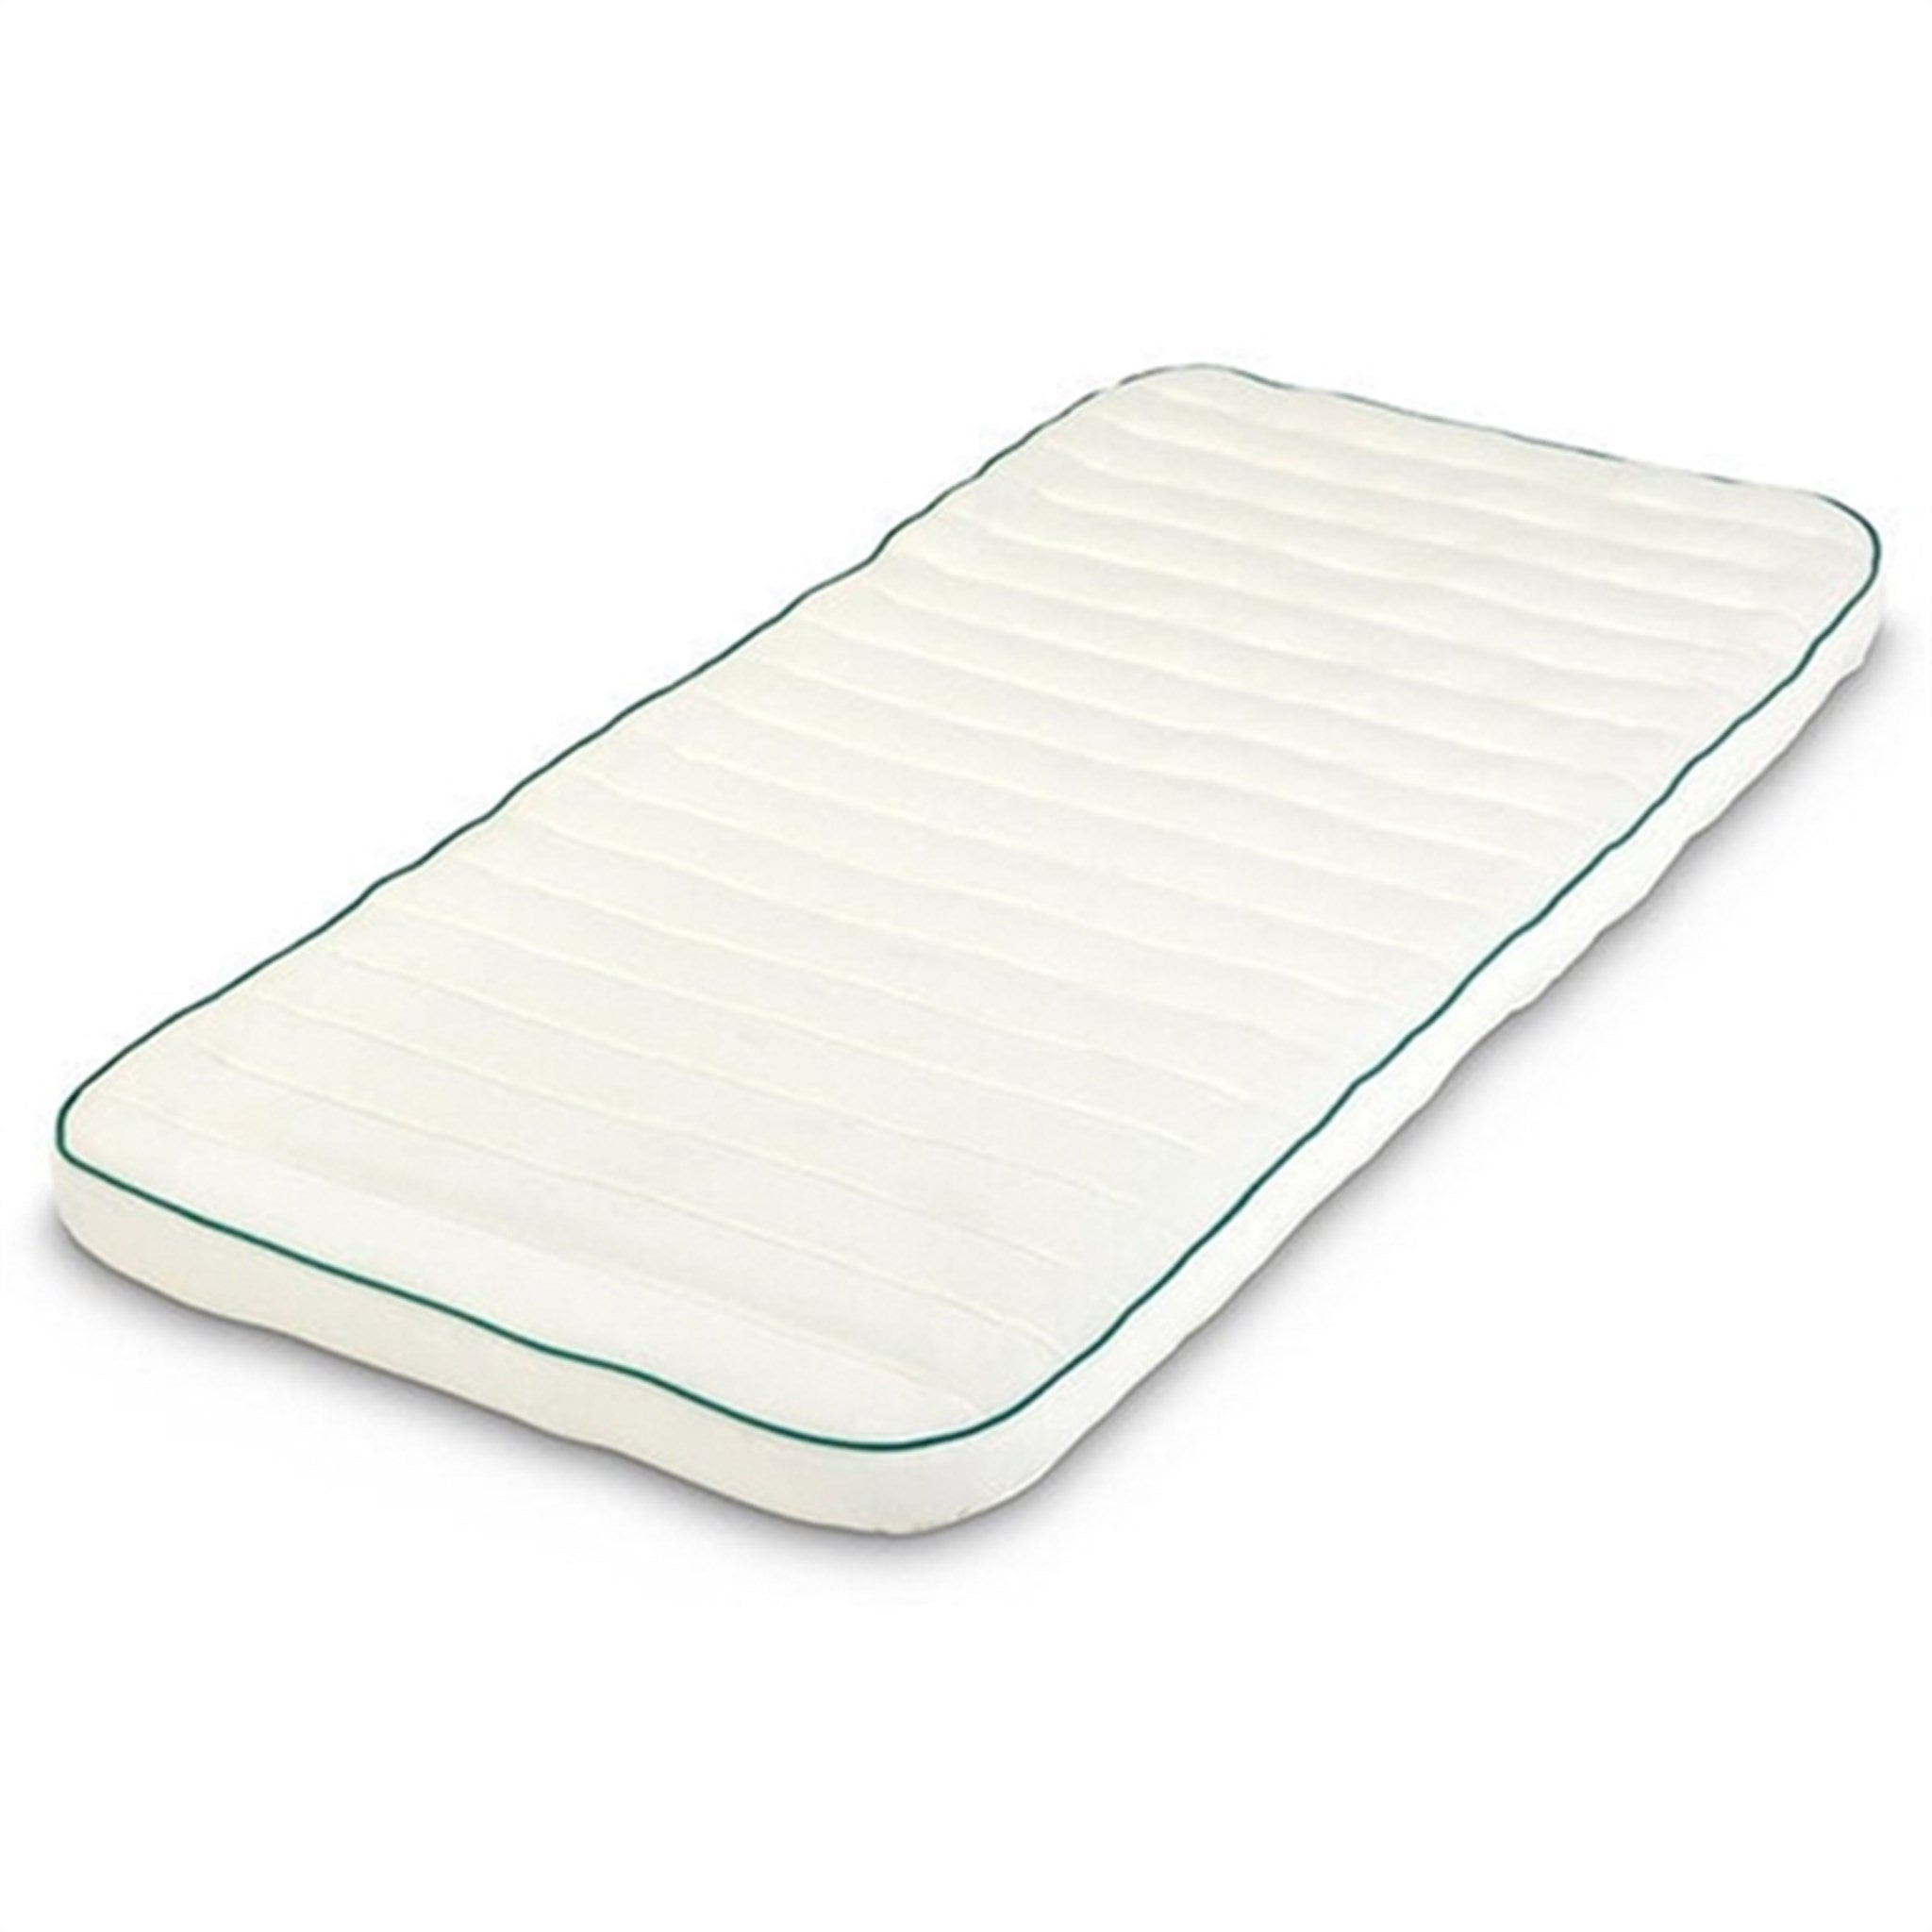 Cocoon Organic Kapok Mattress for Baby Bed